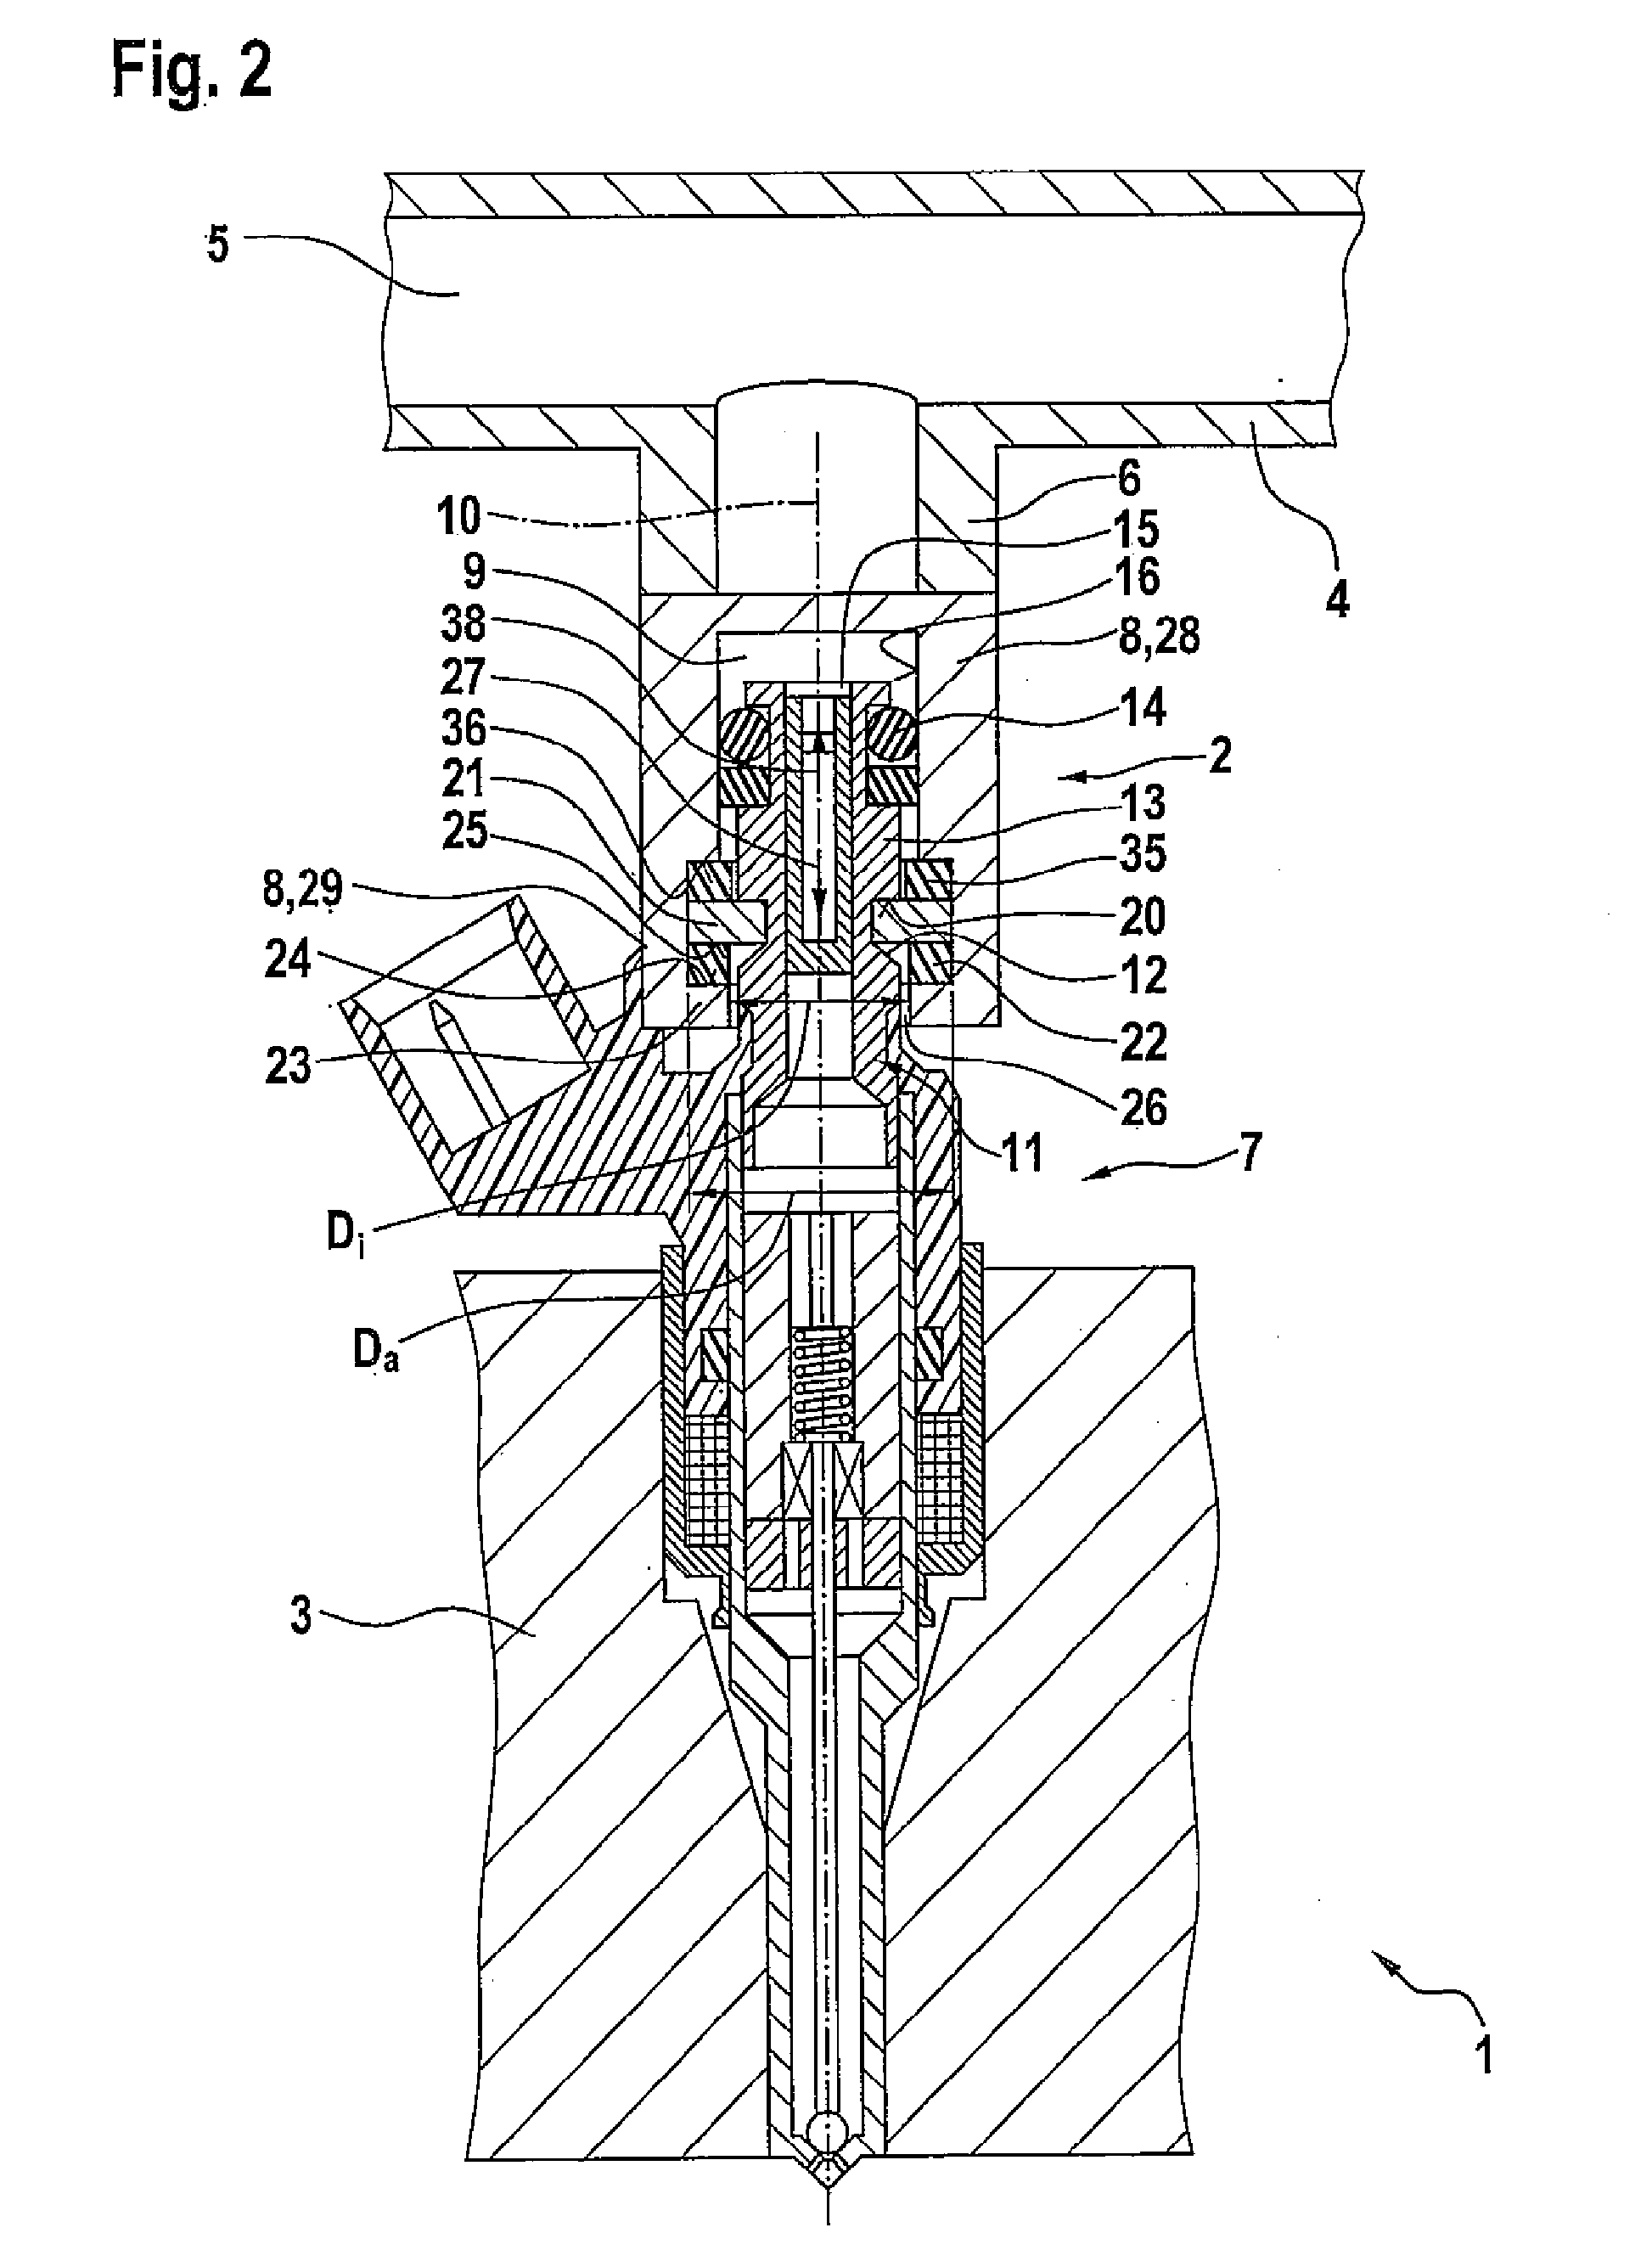 Fuel injection system having a fuel-carrying component, a fuel injector and a suspension